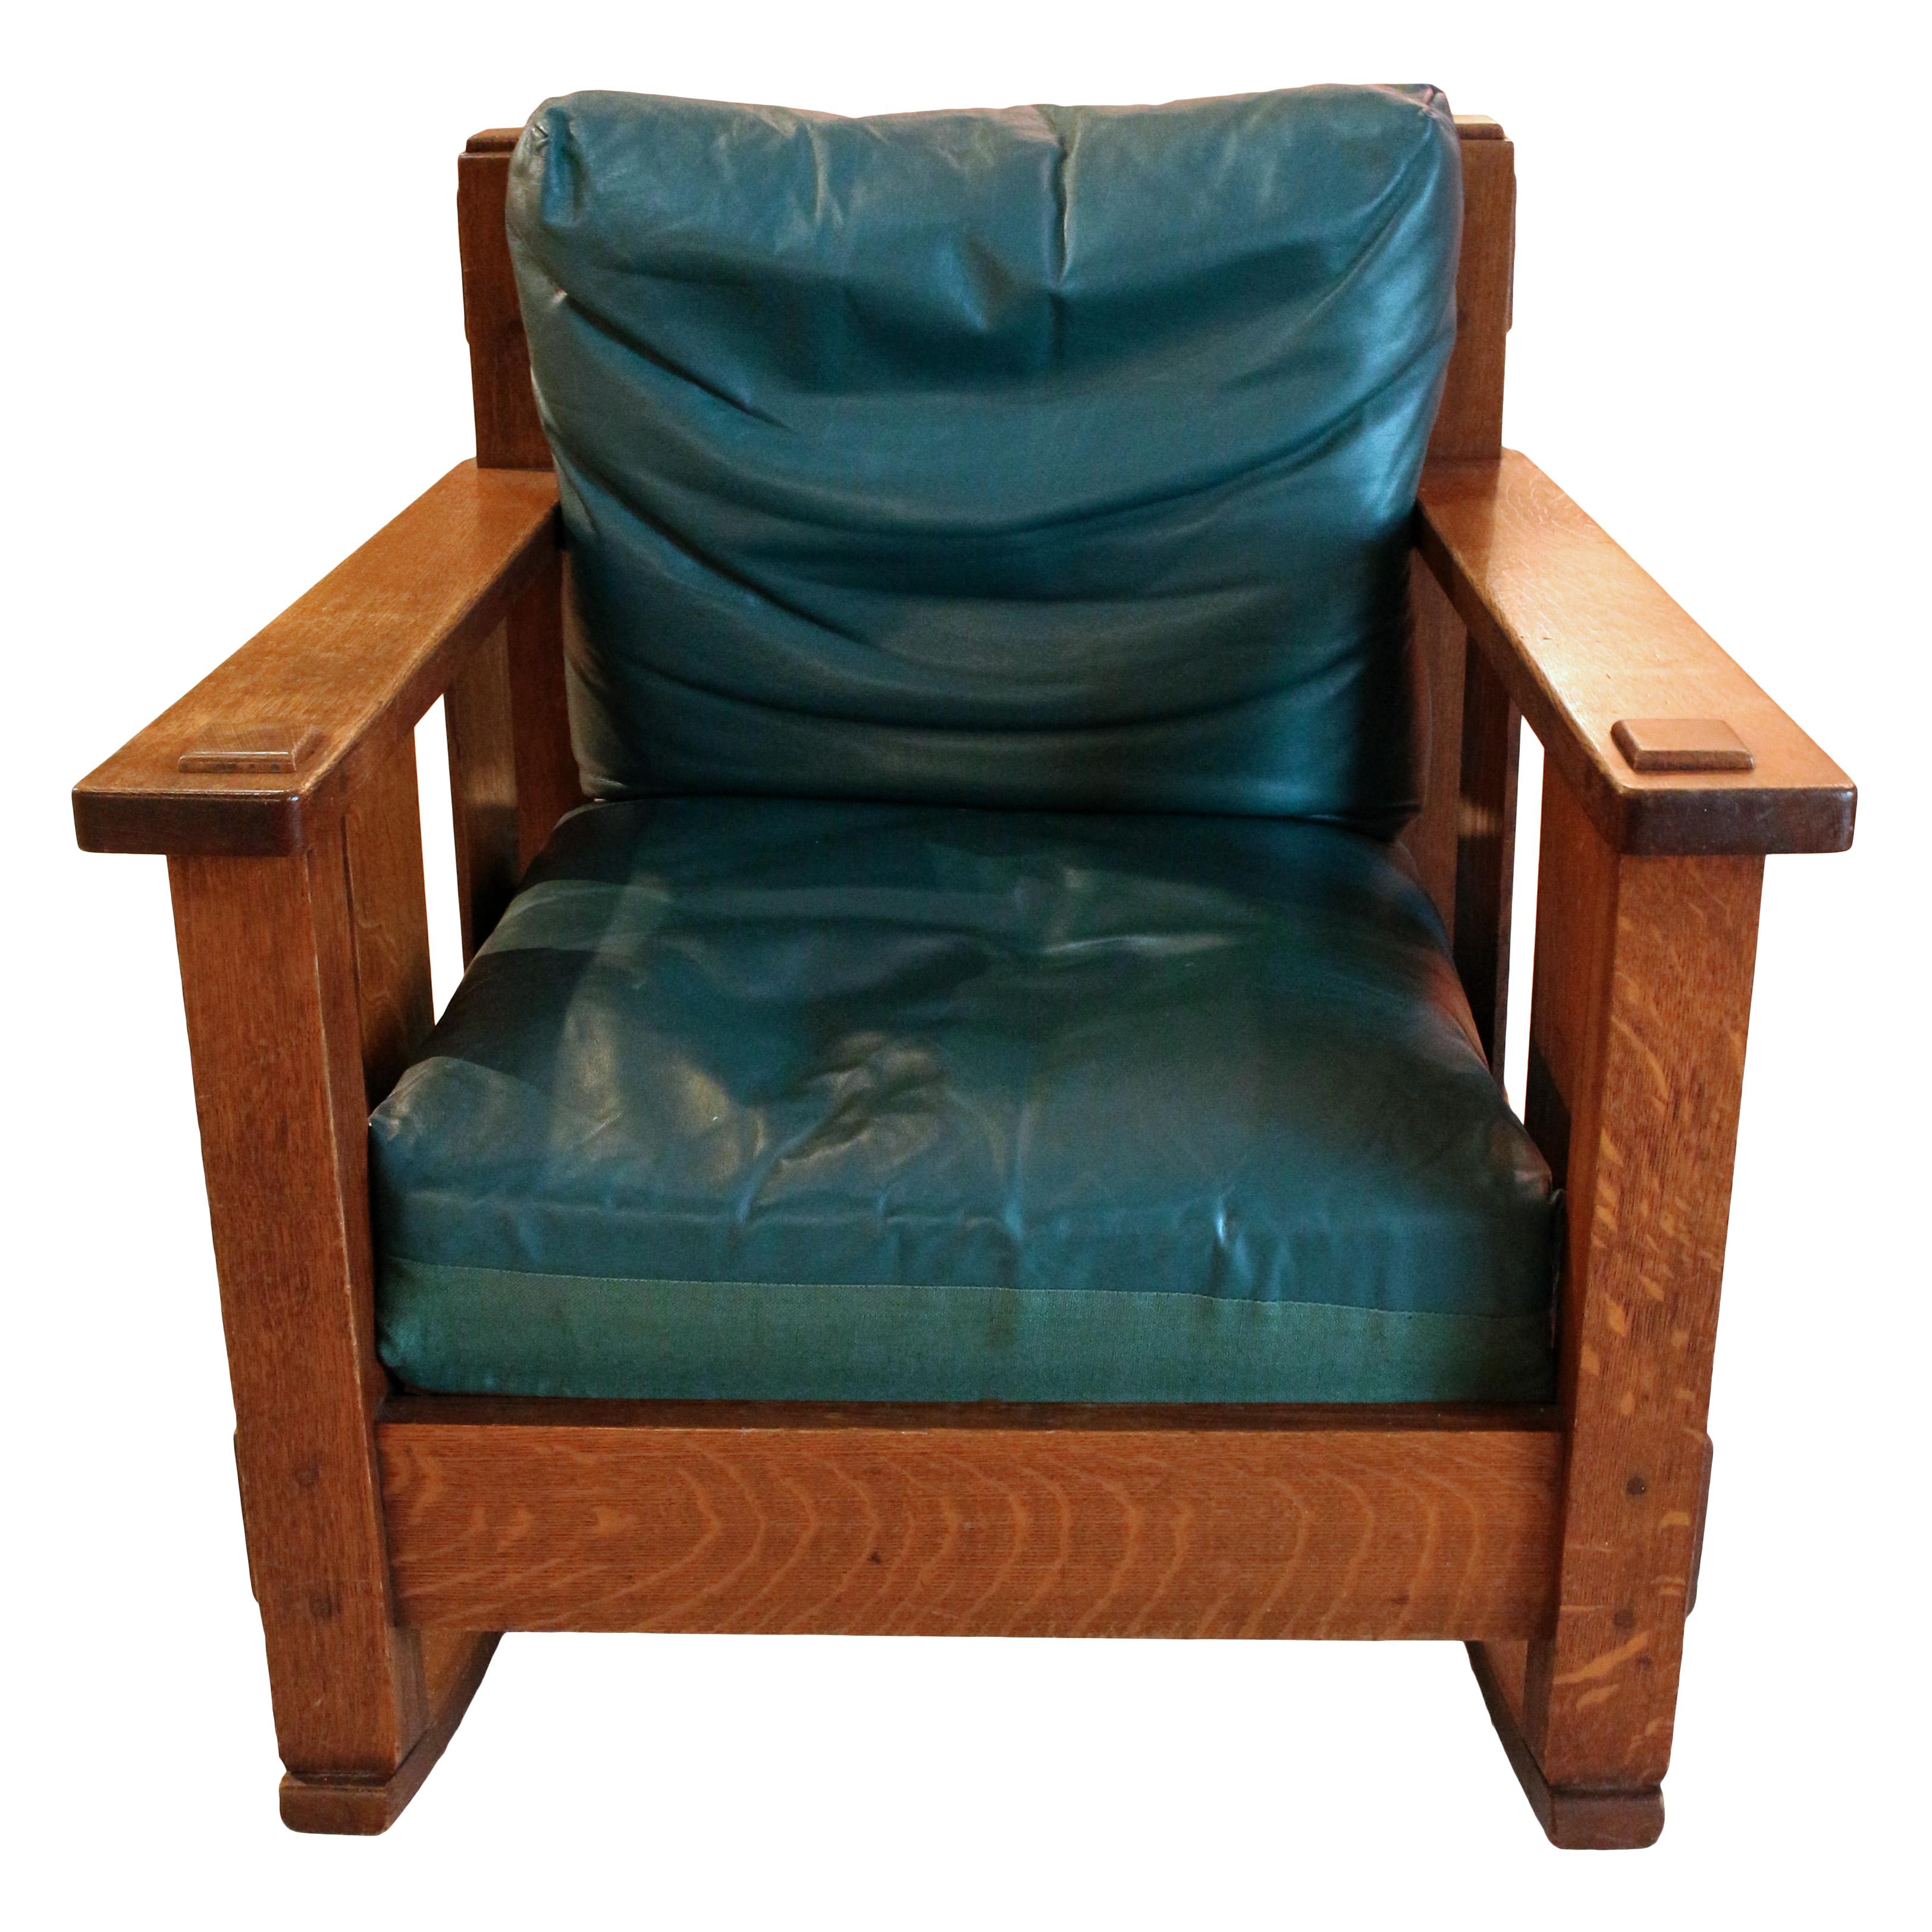 Stickley rocking arm chair, circa 1902. Removable cushions in blue-green leather. 1902 label: 